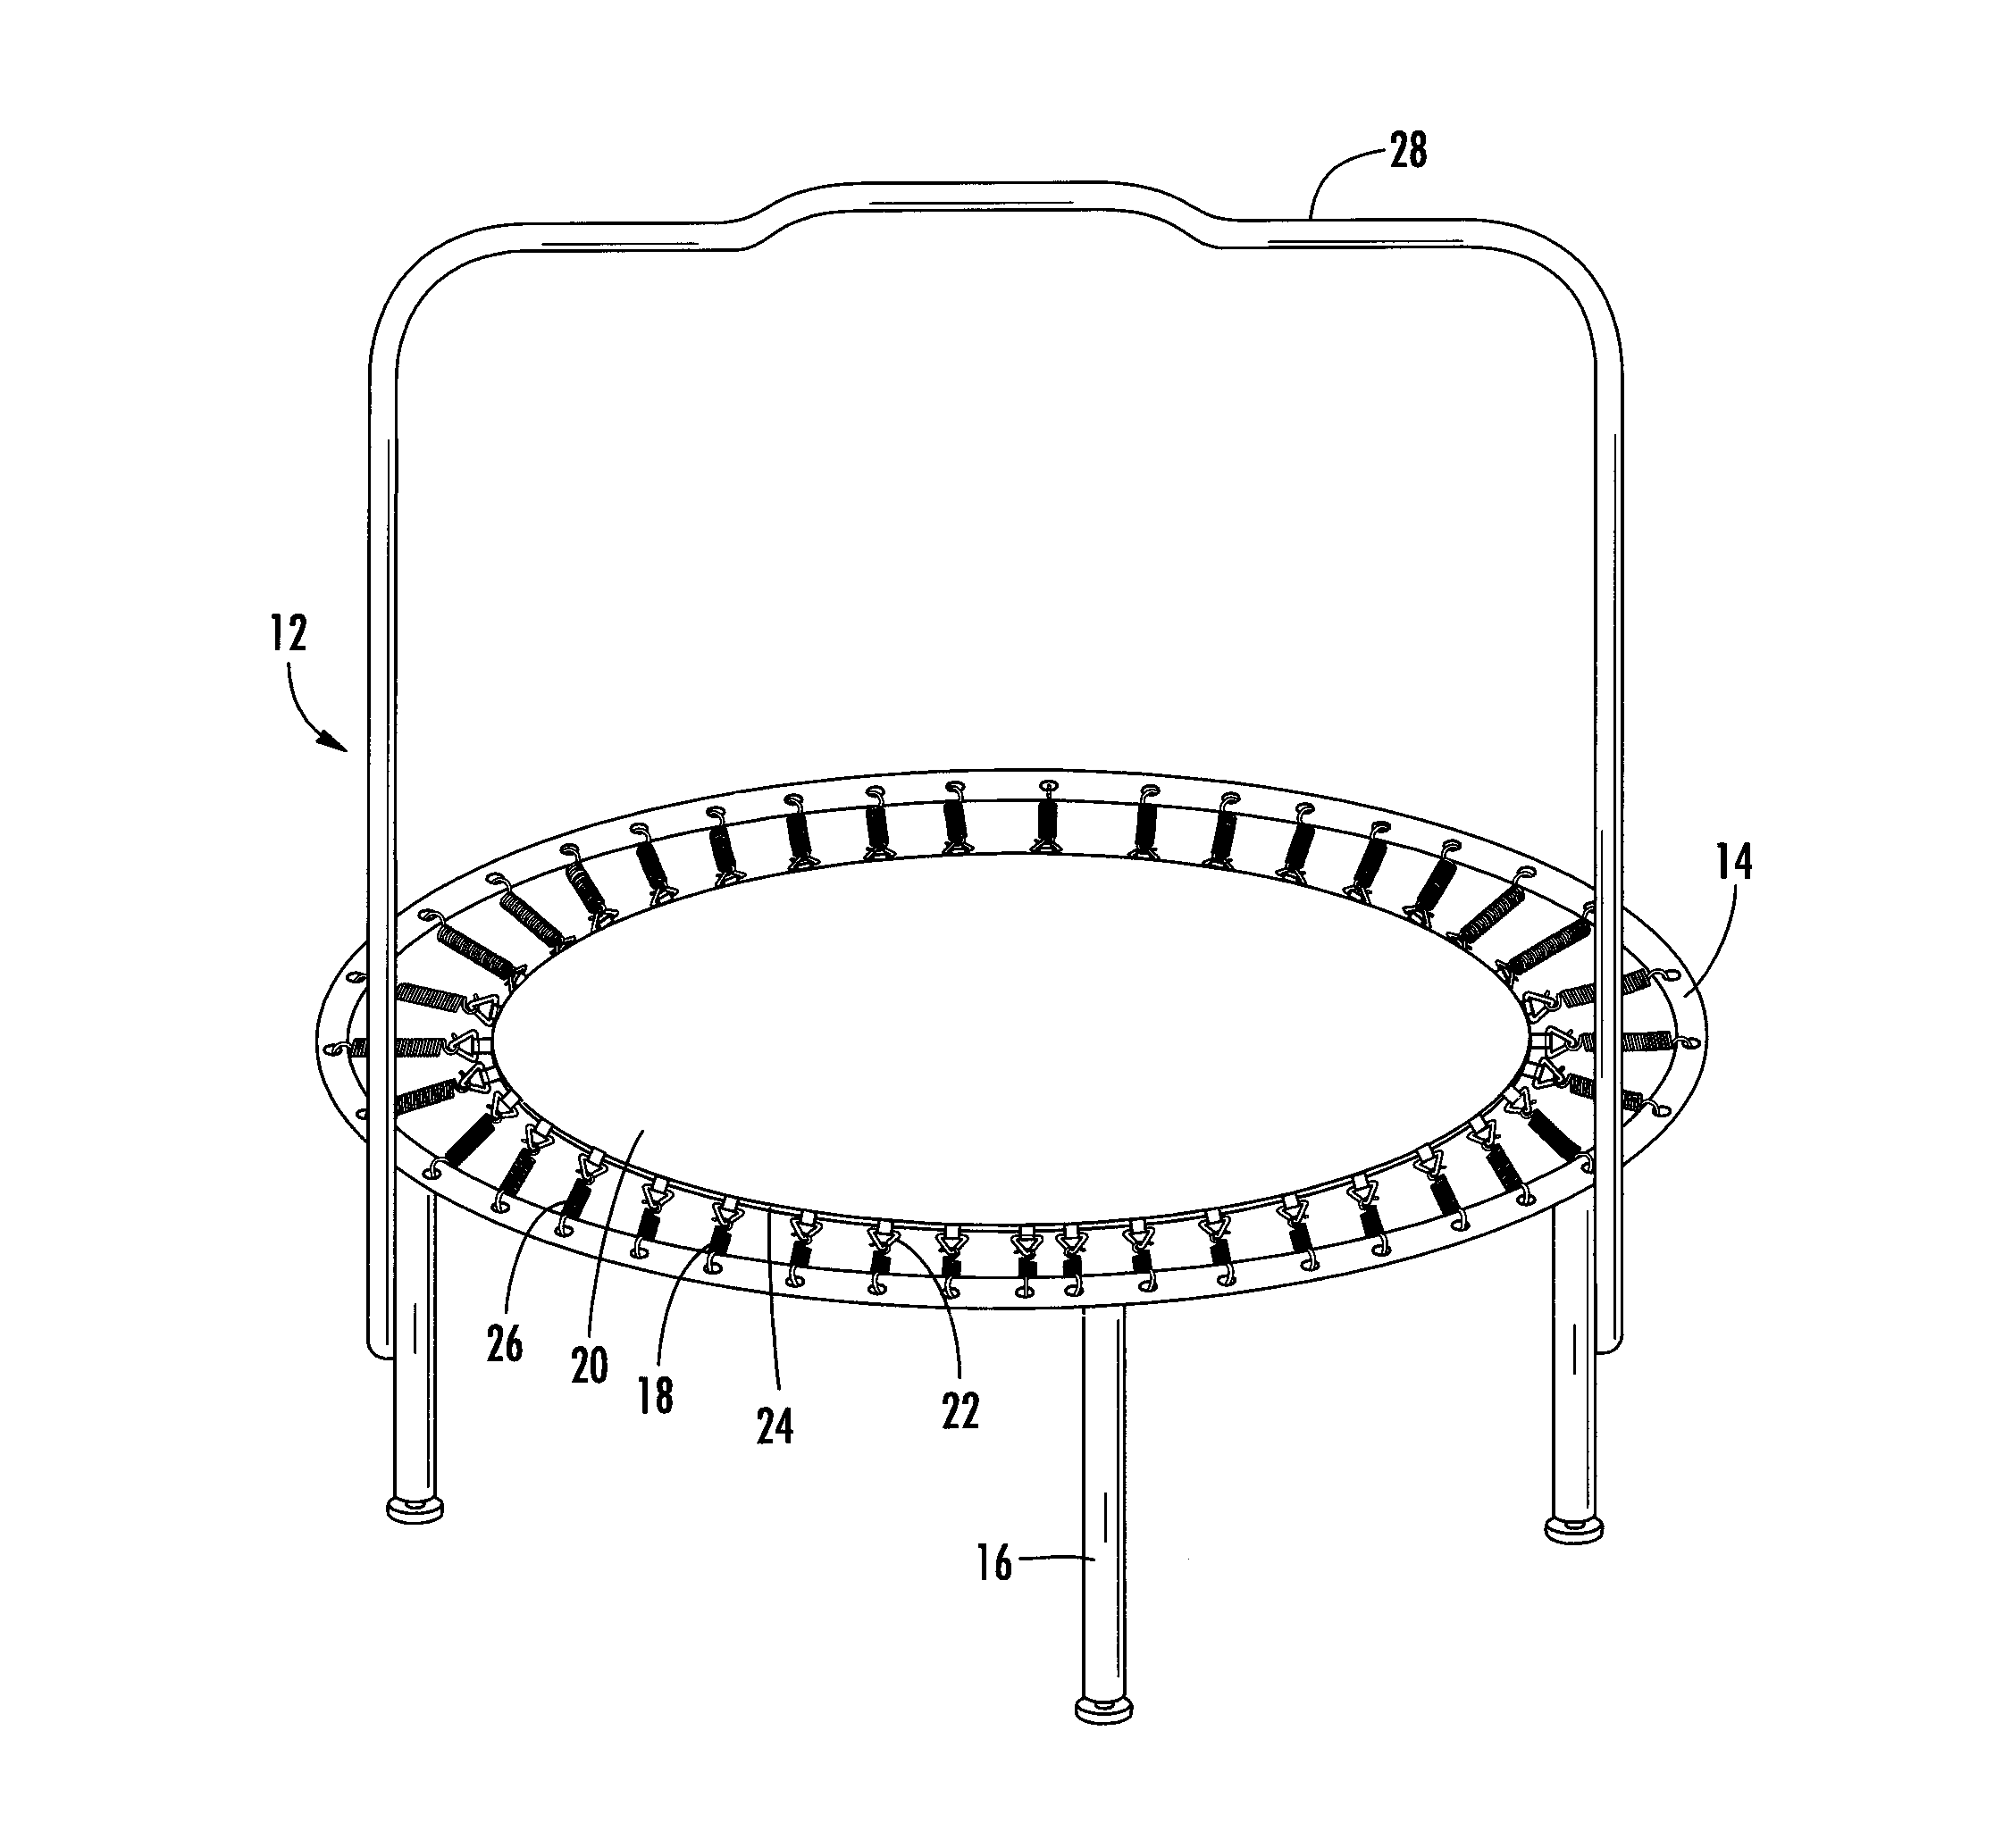 Decorative and safety assembly for dressing a trampoline